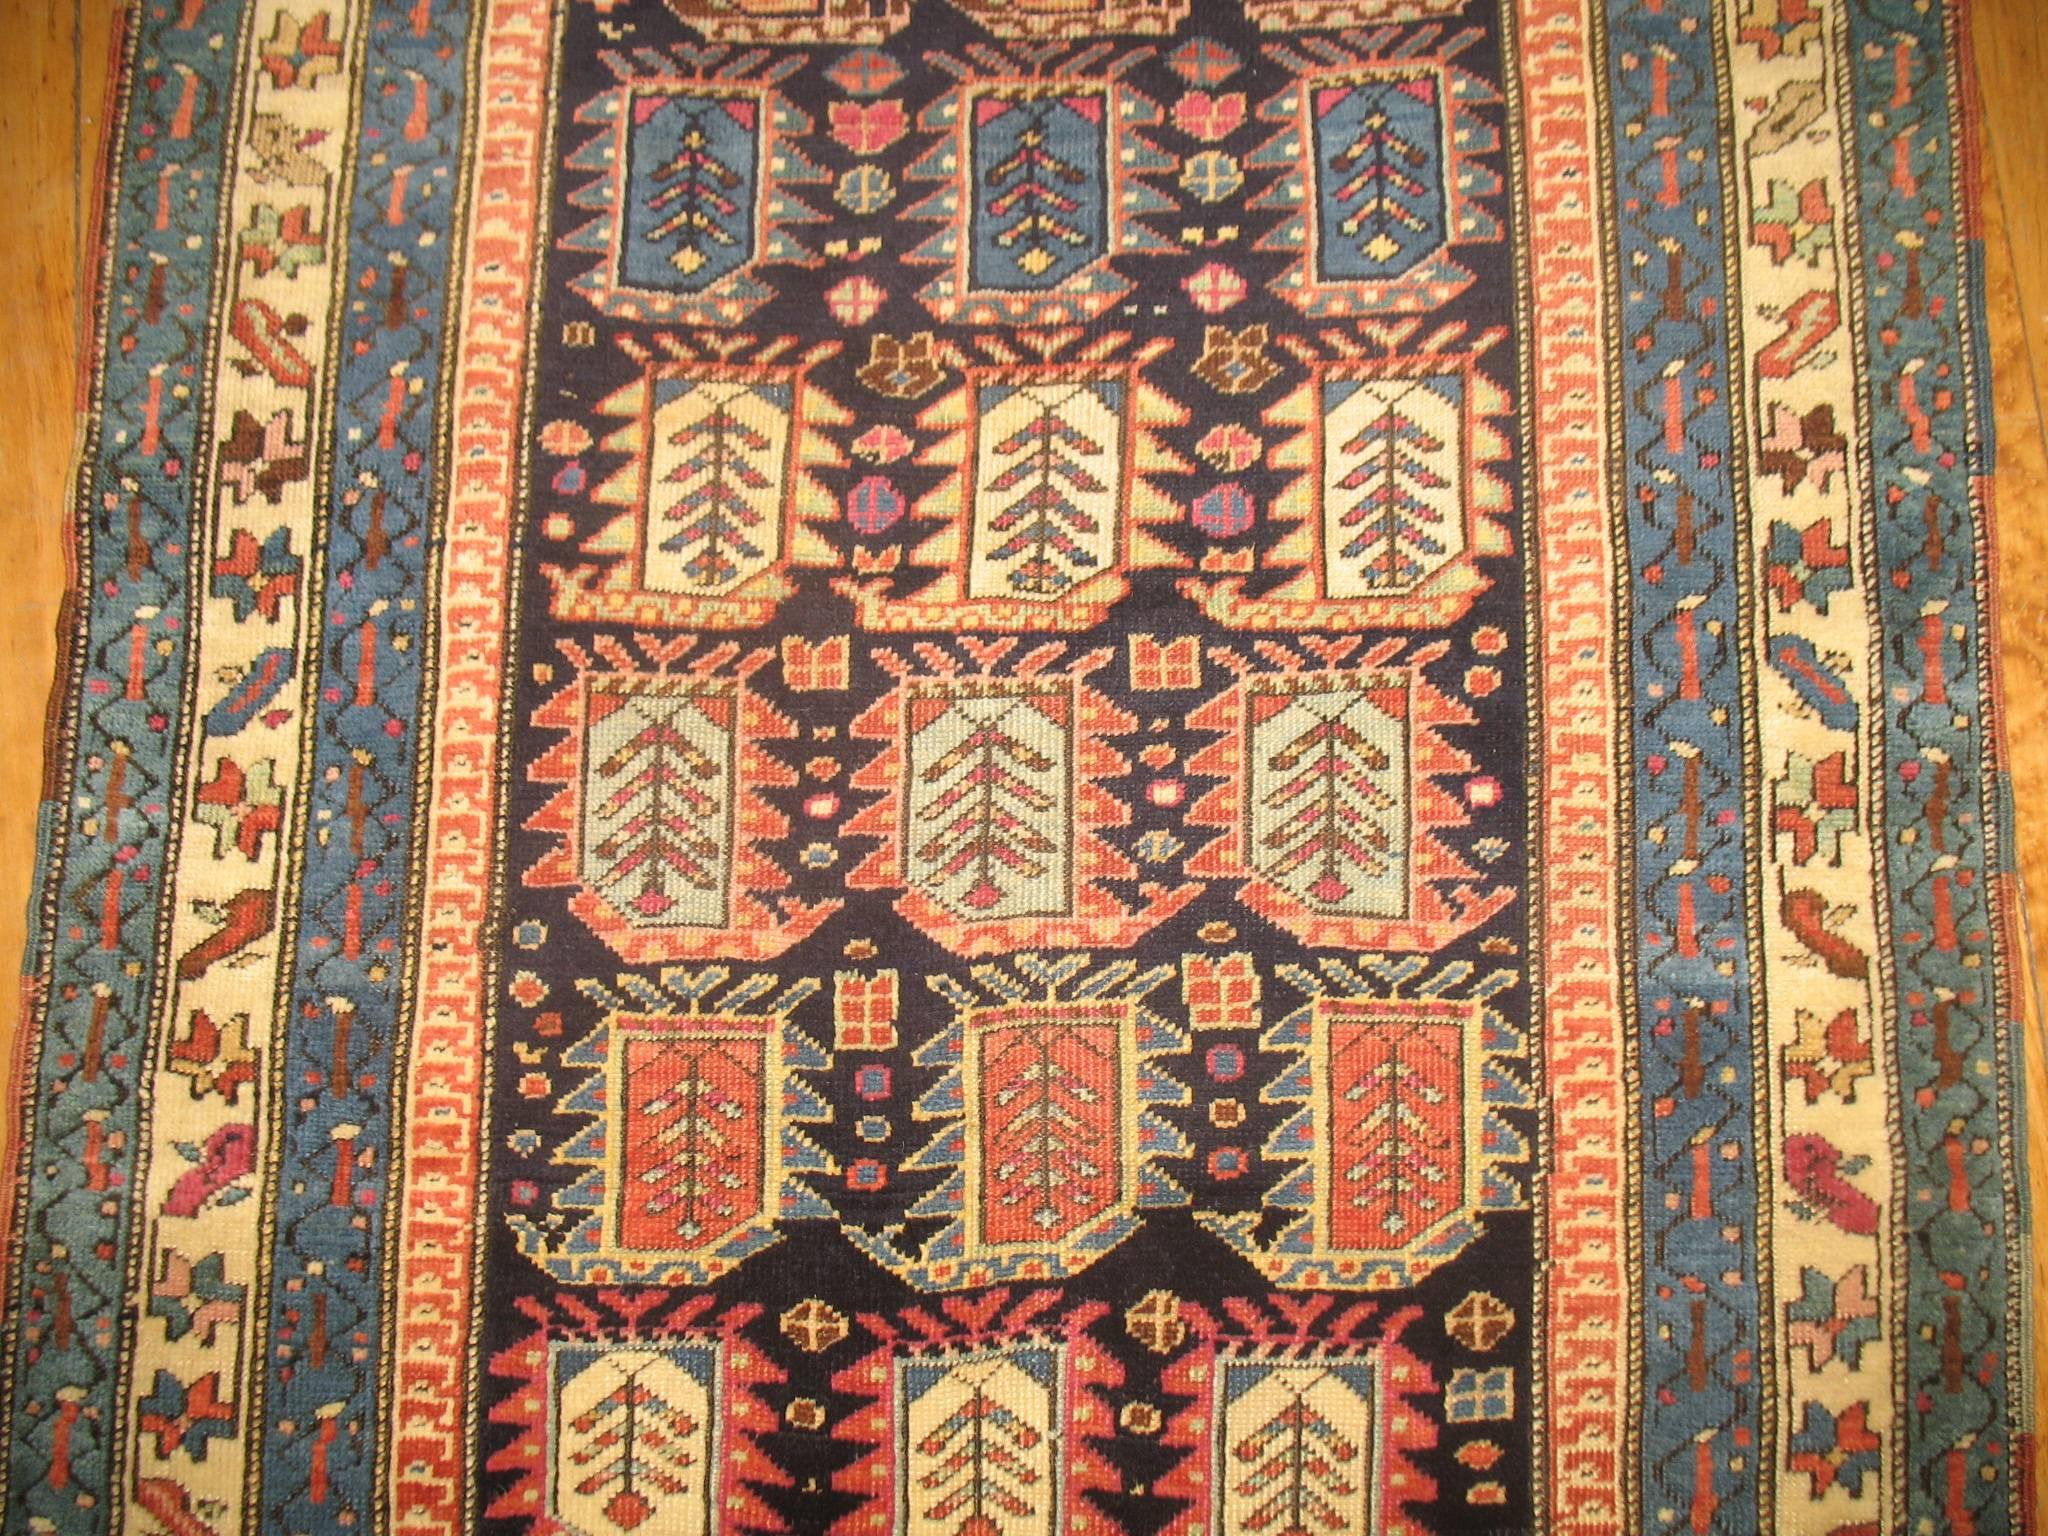 An early 20th century Caucasian runner with an all over boteh/paisley design.